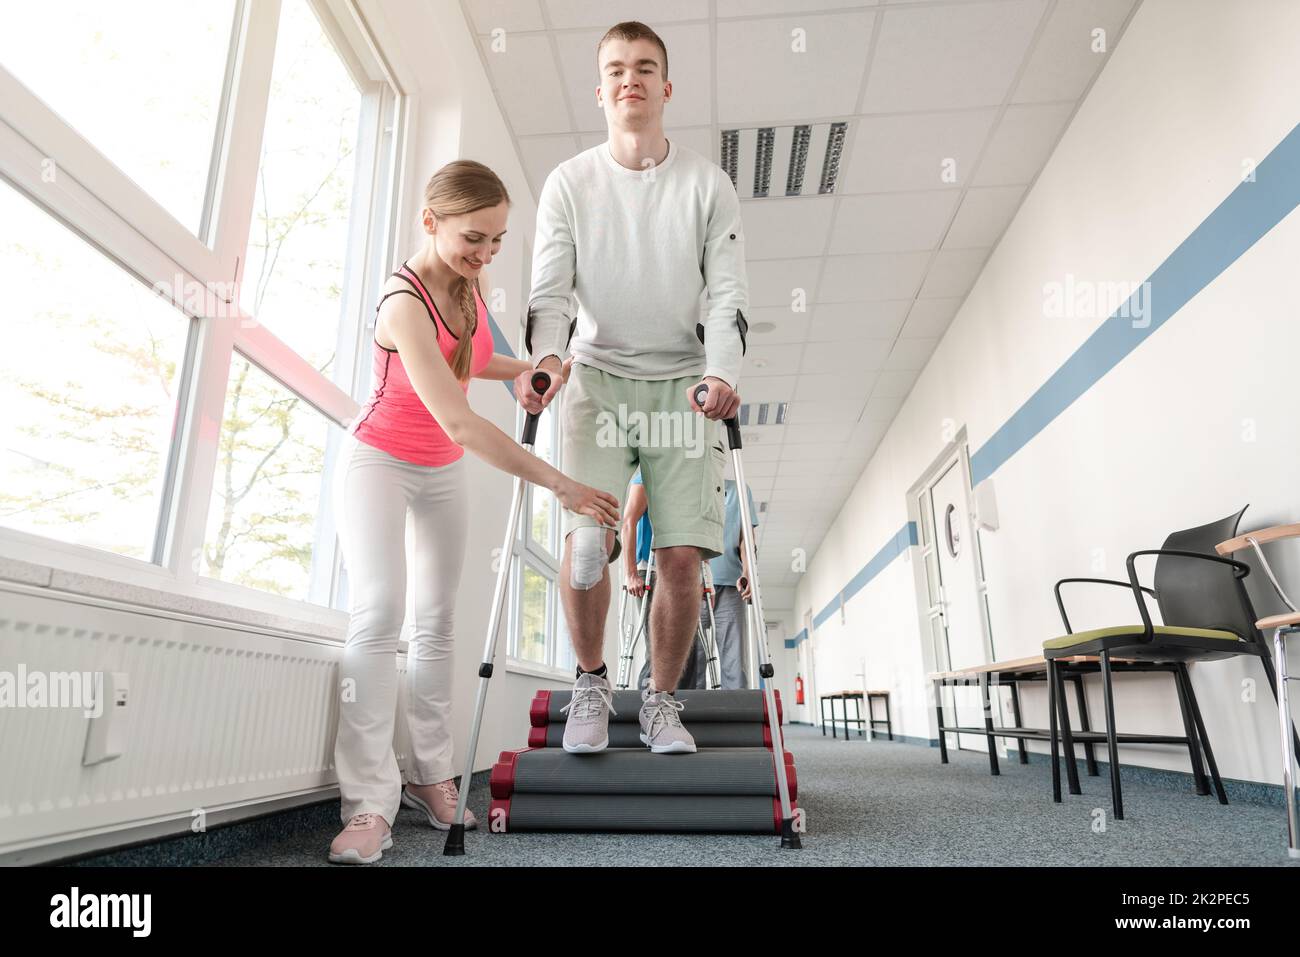 People in rehabilitation learning how to walk with crutches Stock Photo